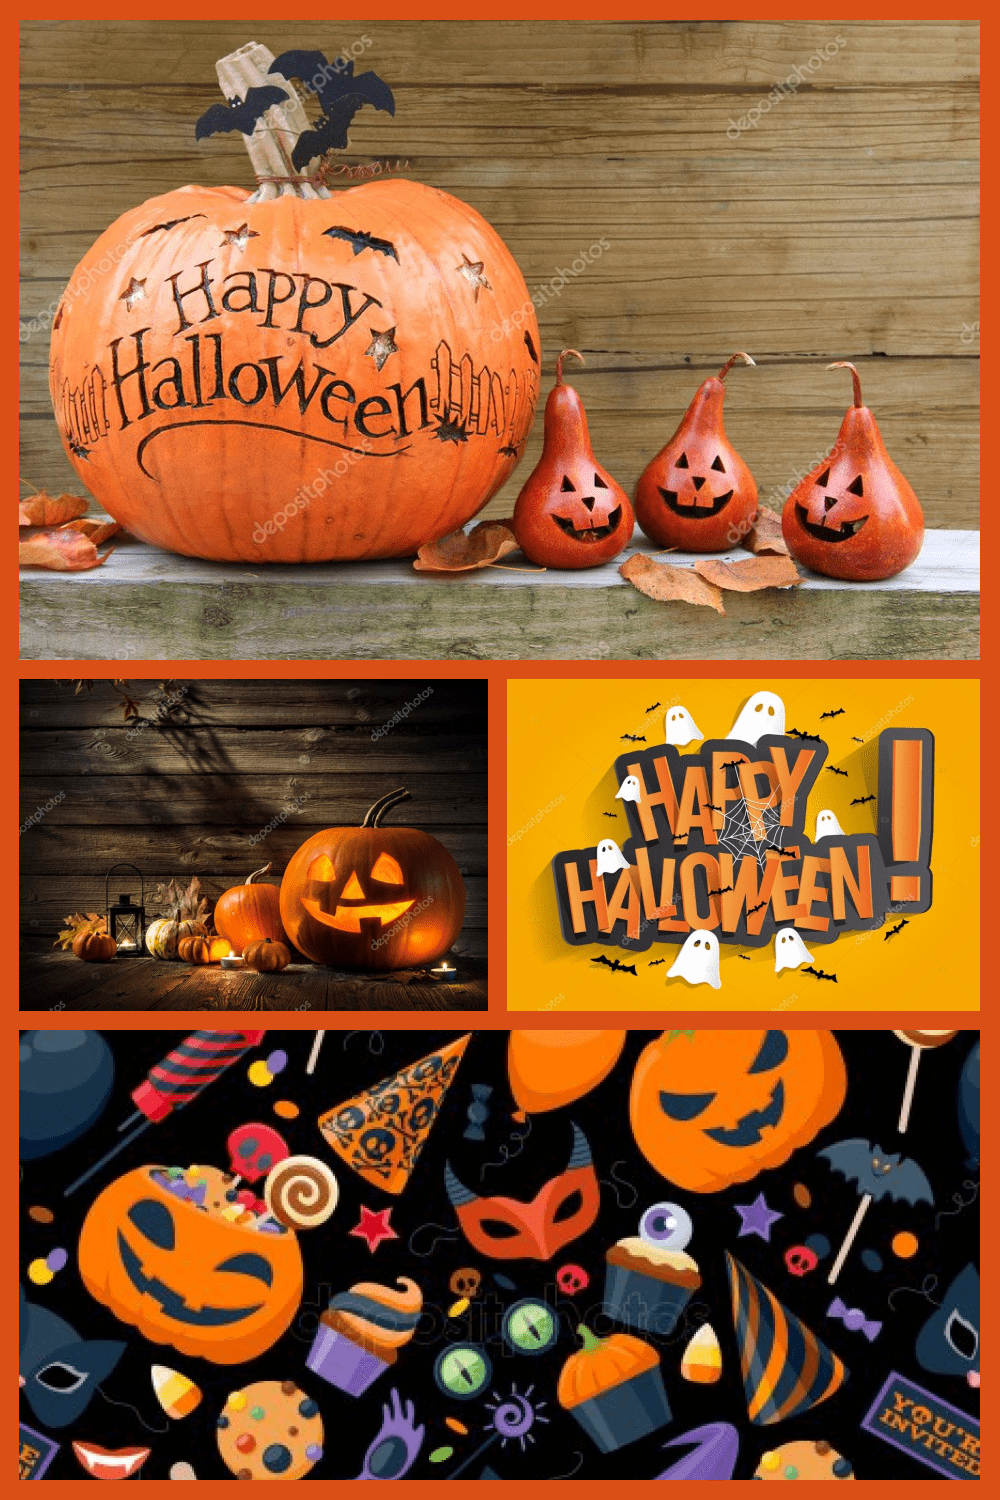 Templates and stencils for real Halloween decorations.